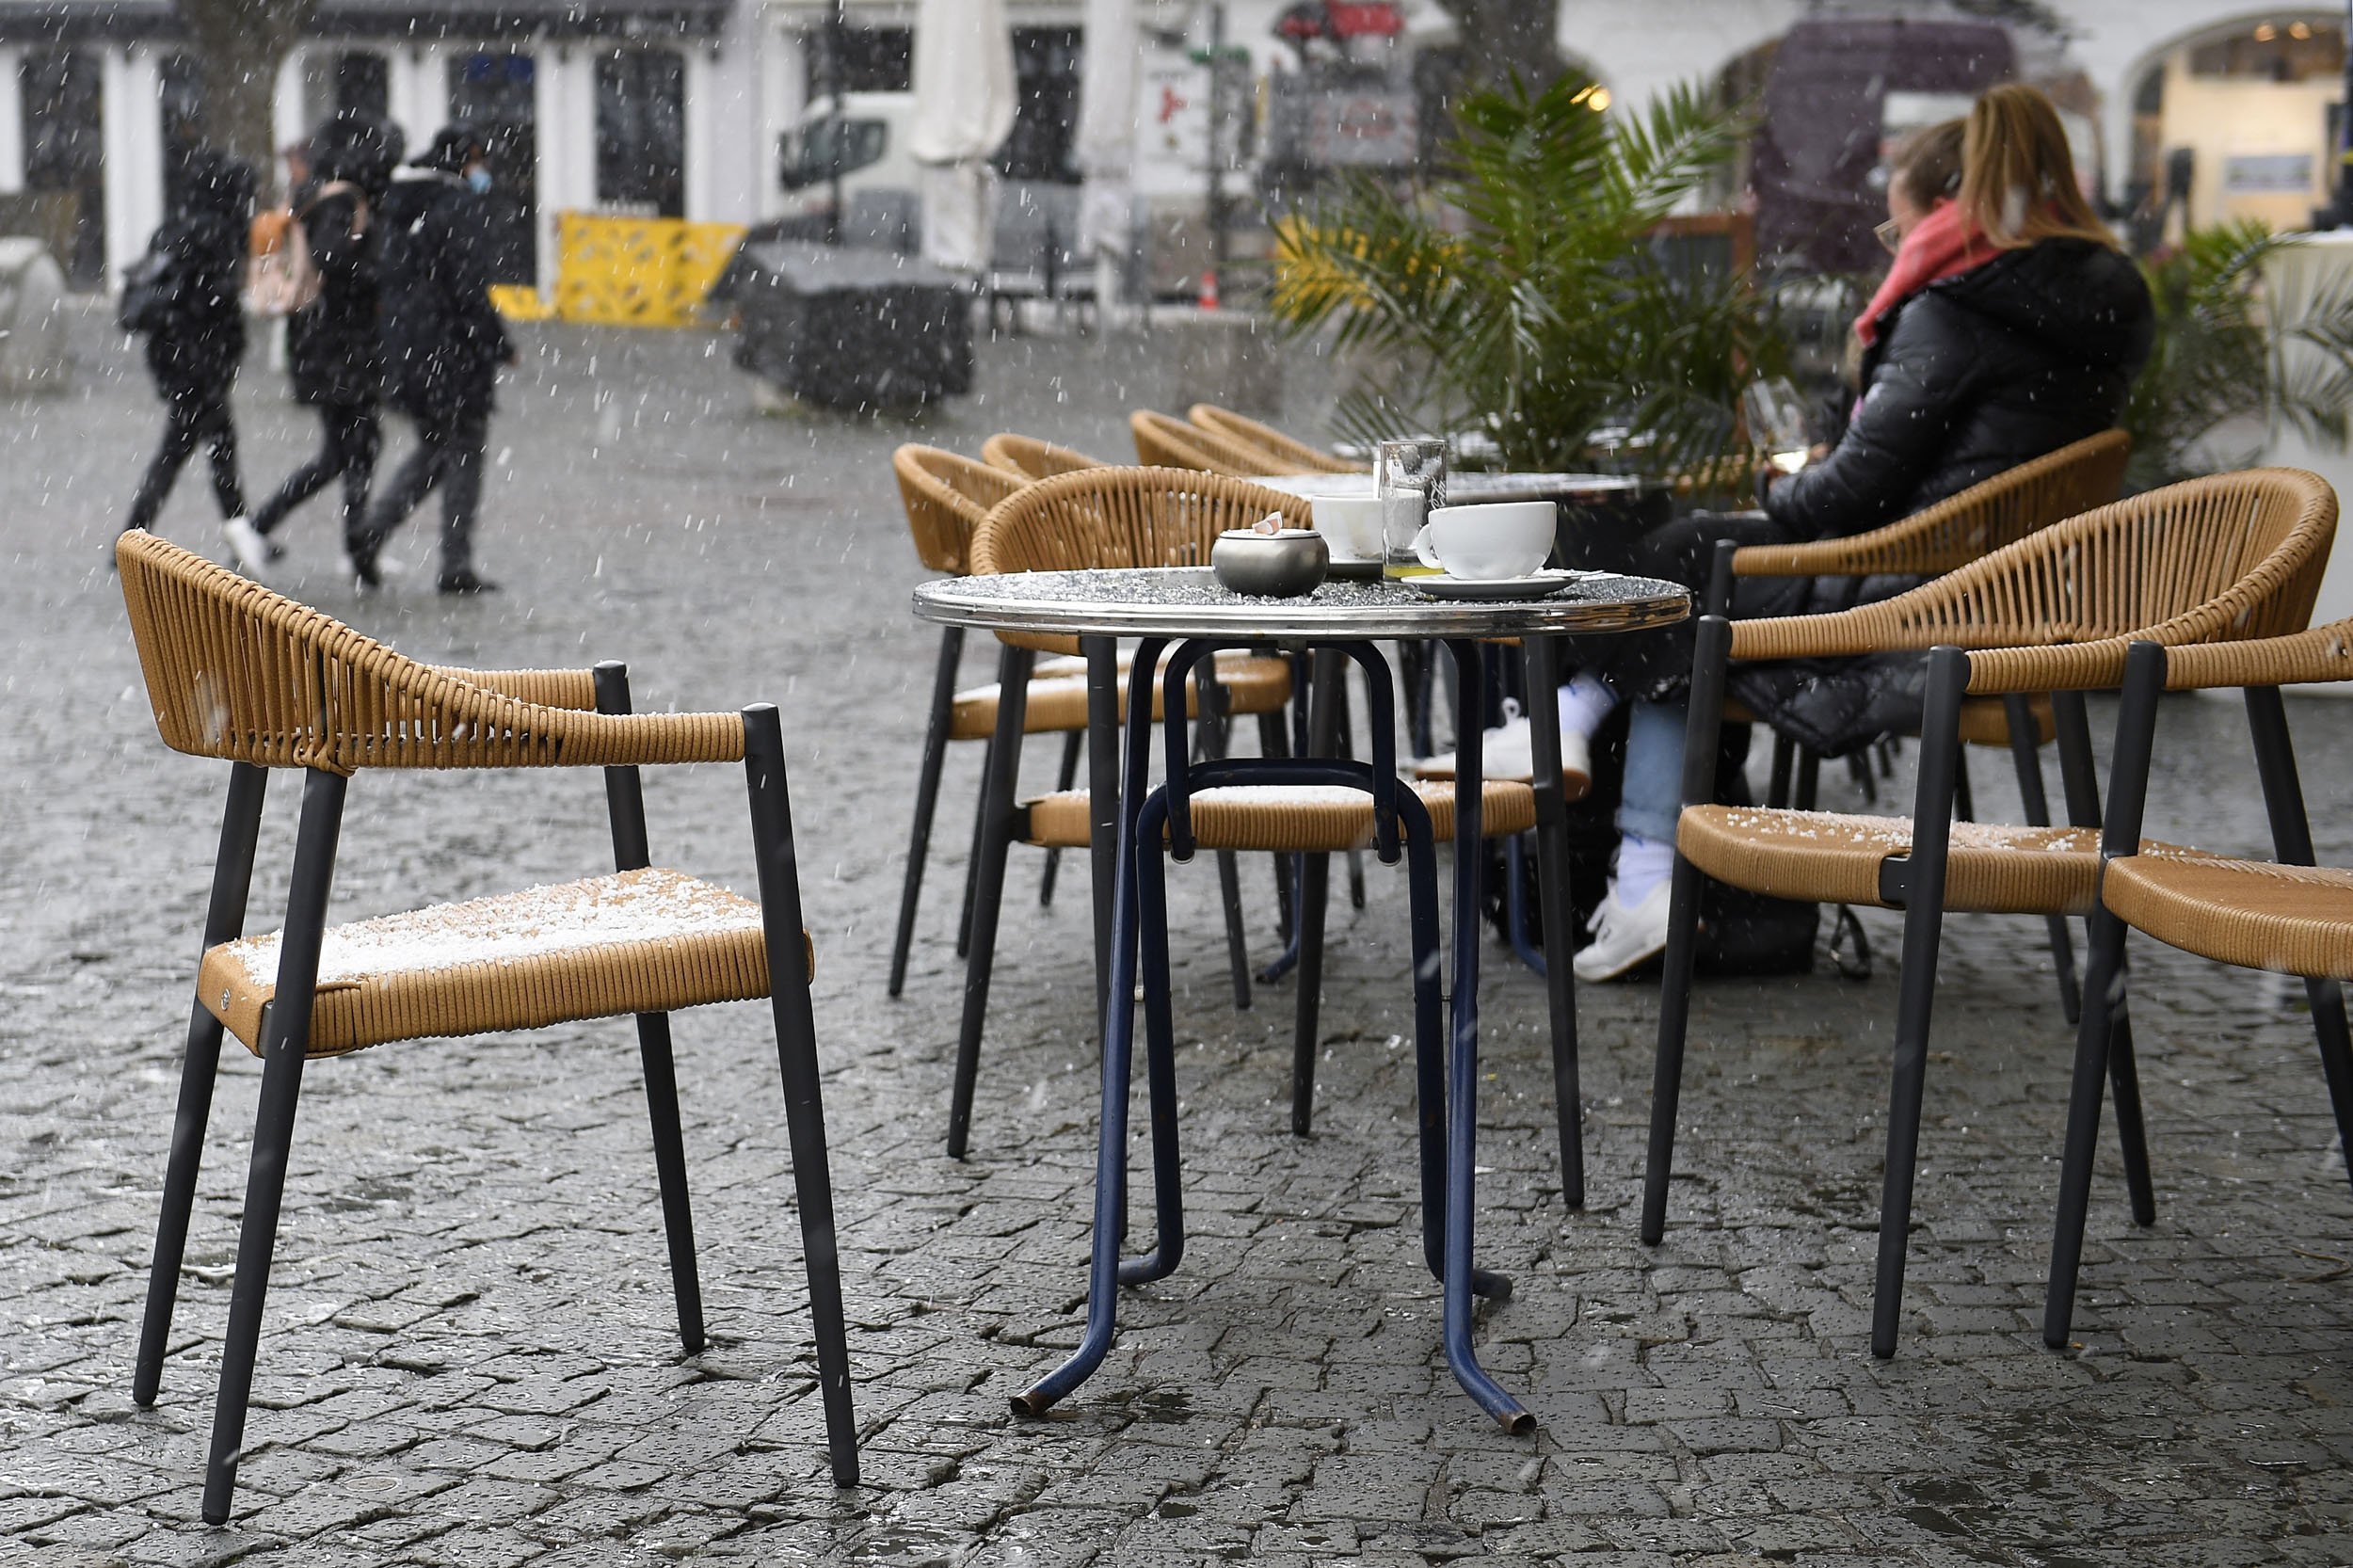 An empty table is seen outside a cafe during a sleet shower in Saarbruecken, western Germany, on April 6, 2021, as the border state of Saarland on Tuesday partially reopened during the ongoing coronavirus (Covid-19) pandemic. - Germans in the tiny border state of Saarland returned to cafes, cinemas and cultural venues on April 6, even as the rest of the country faces tighter coronavirus restrictions amid rising case numbers. (Photo by JEAN-CHRISTOPHE VERHAEGEN / AFP)